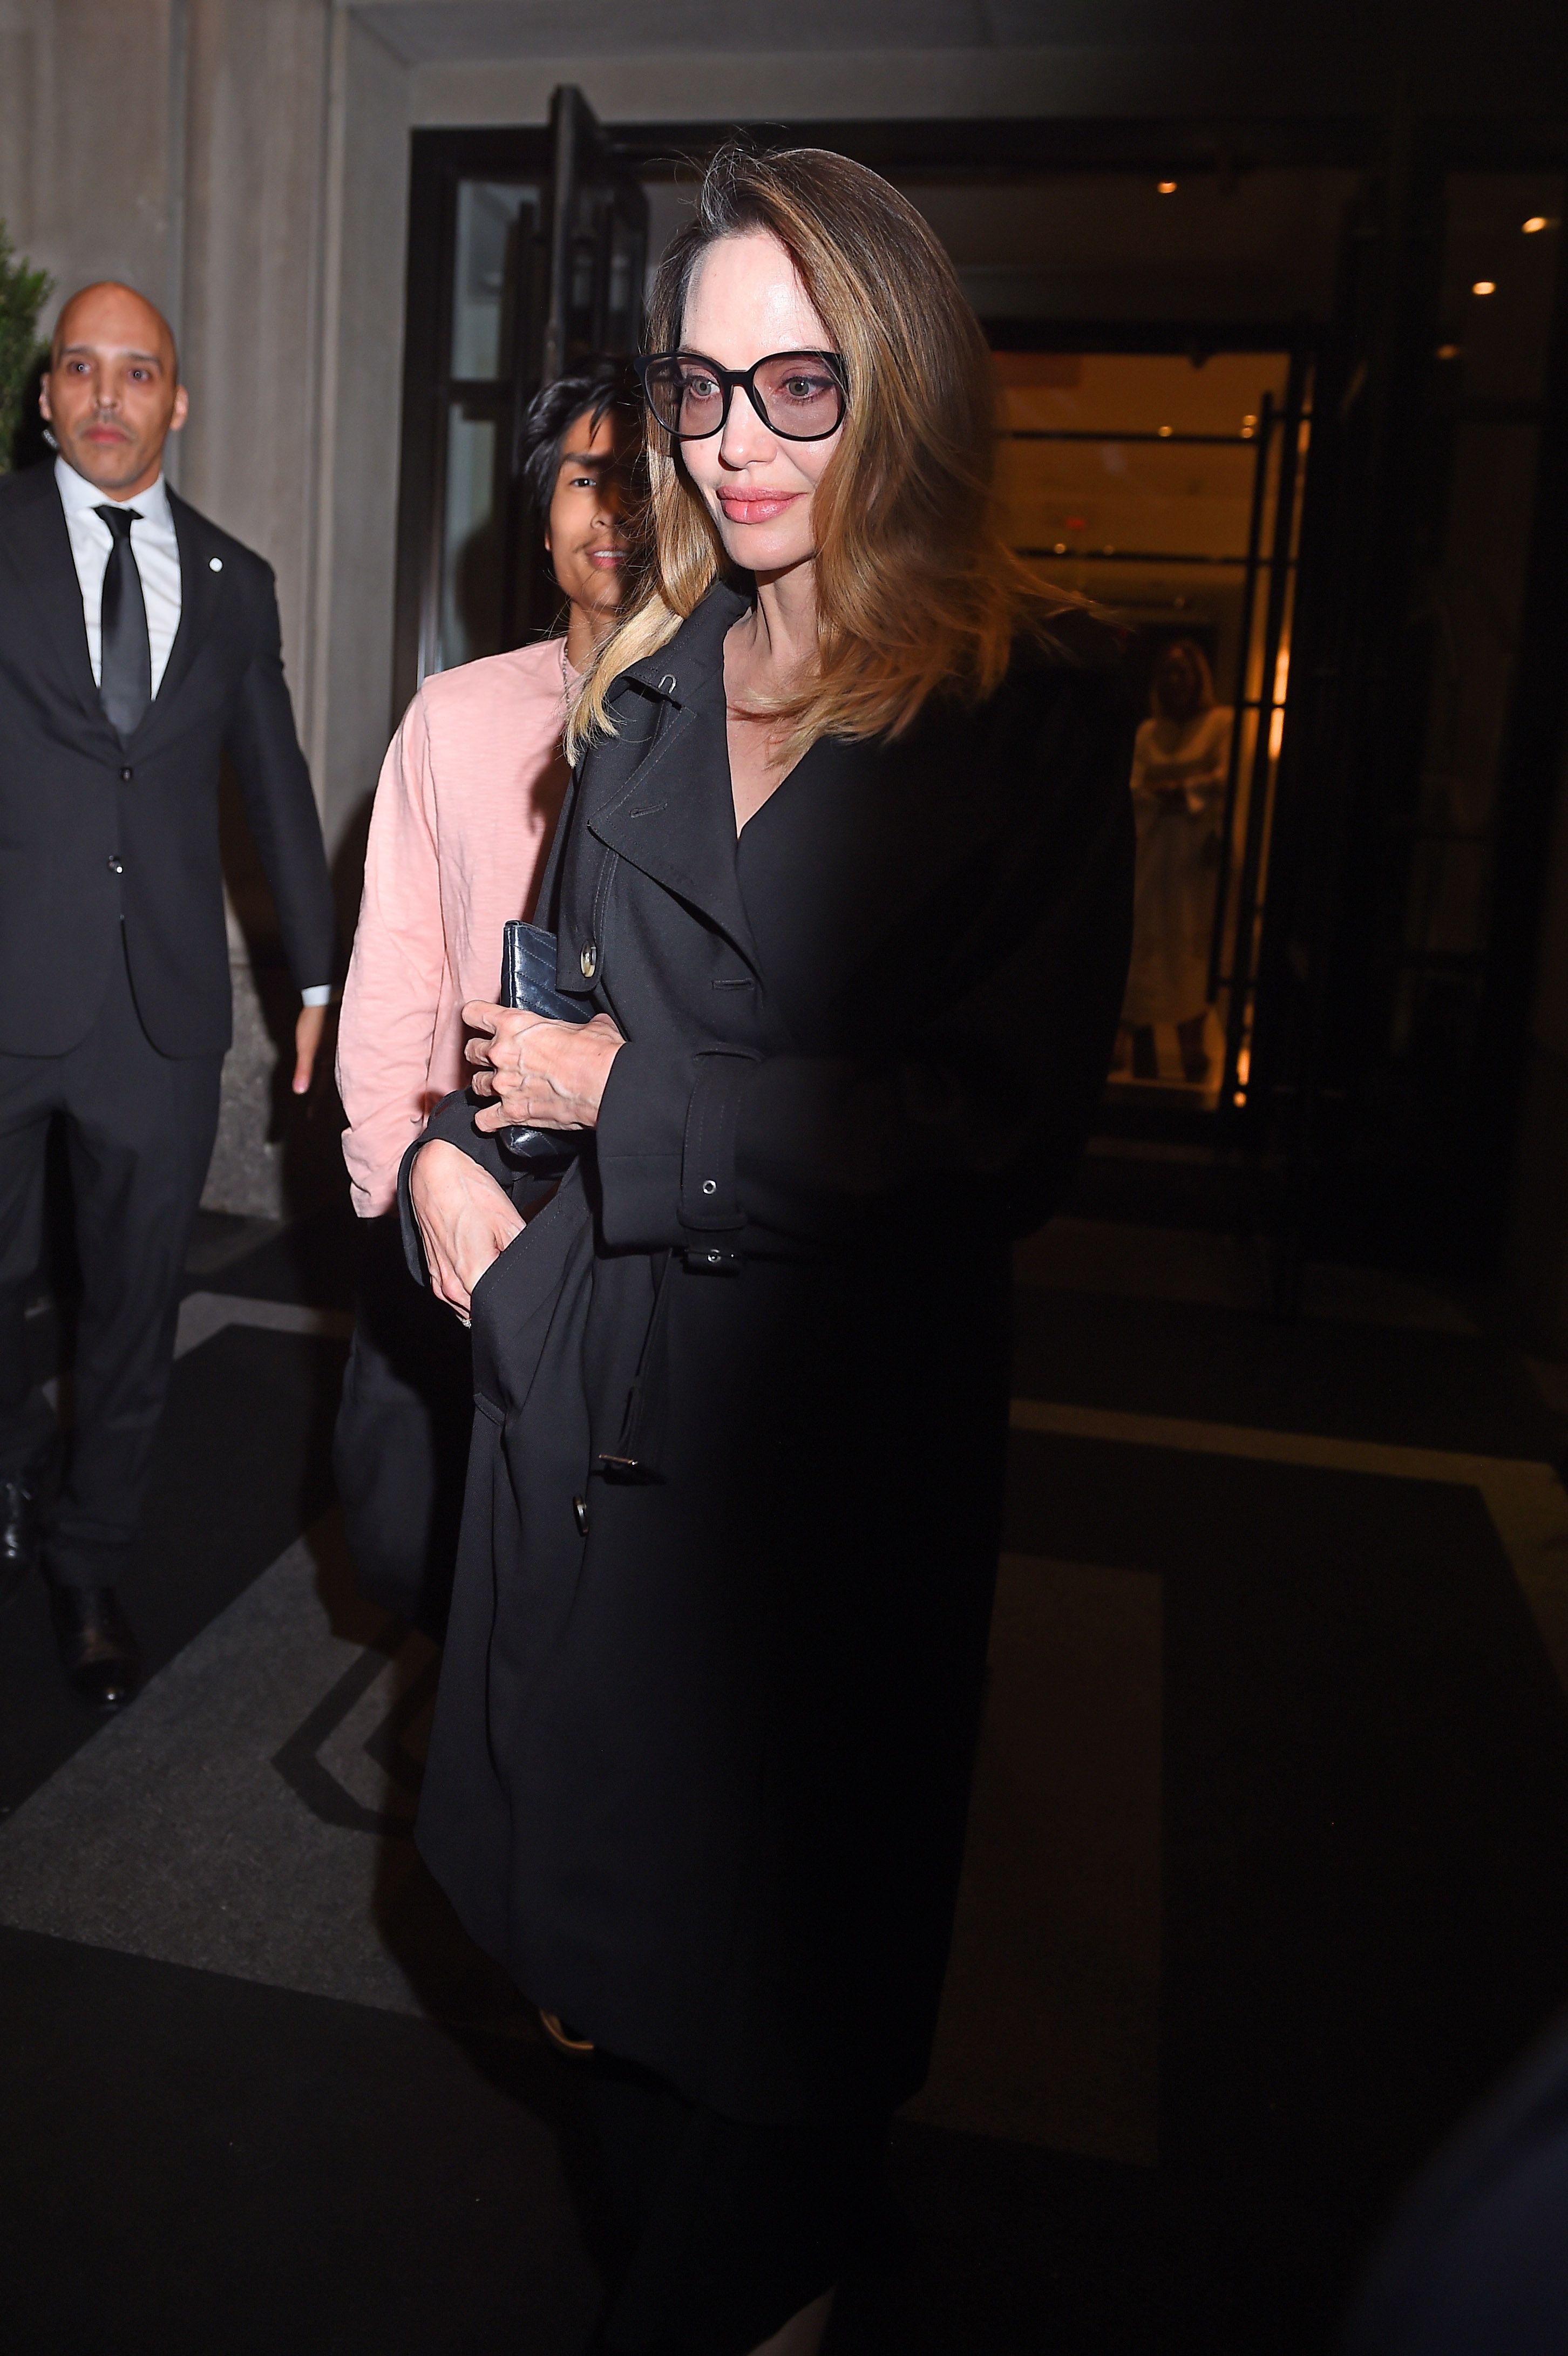 Angelina Jolie Embraced Her Signature Minimalist Style in a Black